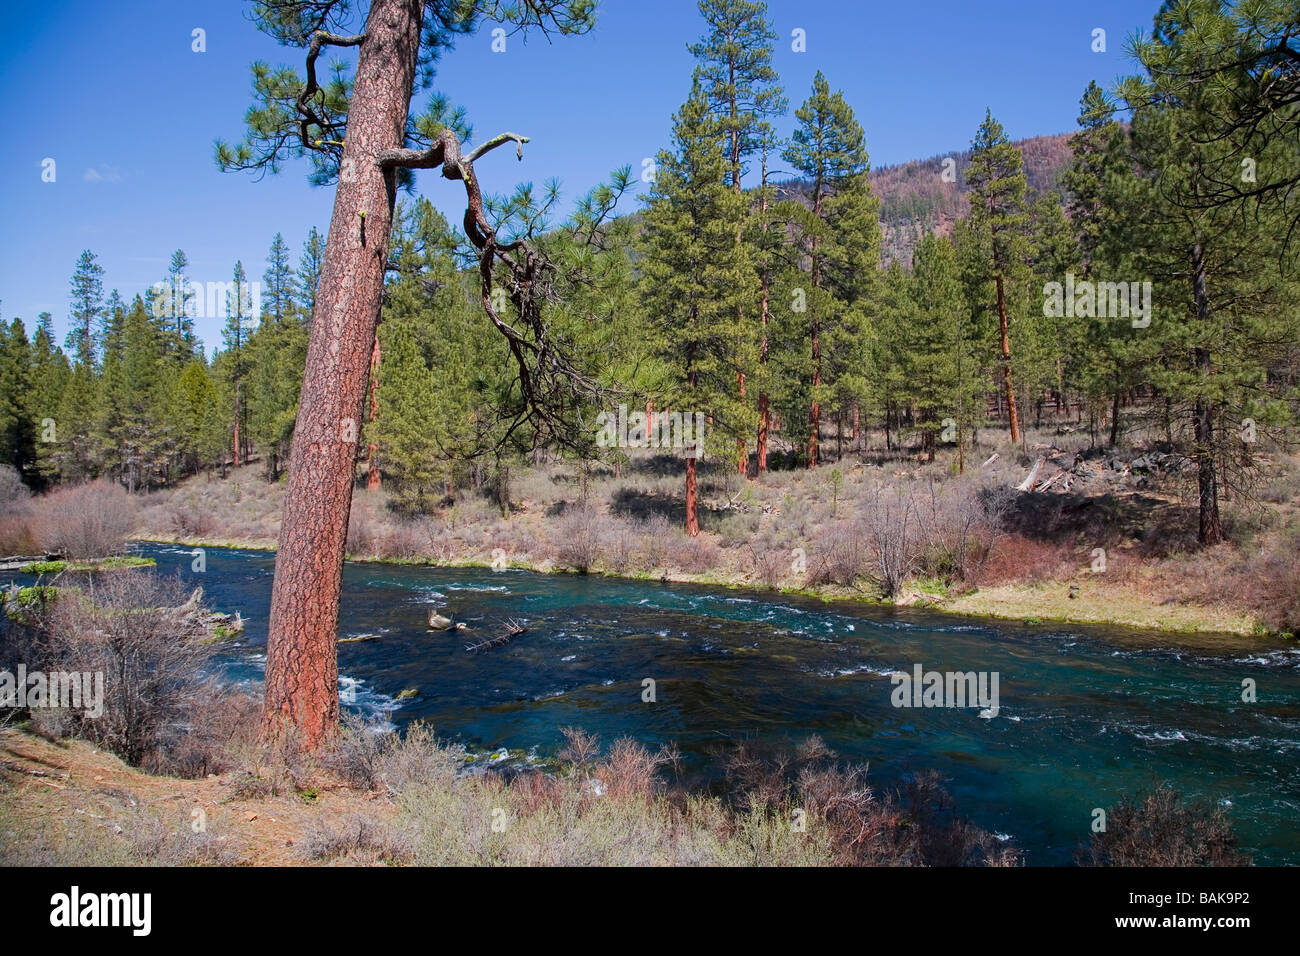 USA OREGON A view of the ponderosa pine along the Metolius River in the Cascade Mountains of central Oregon Stock Photo